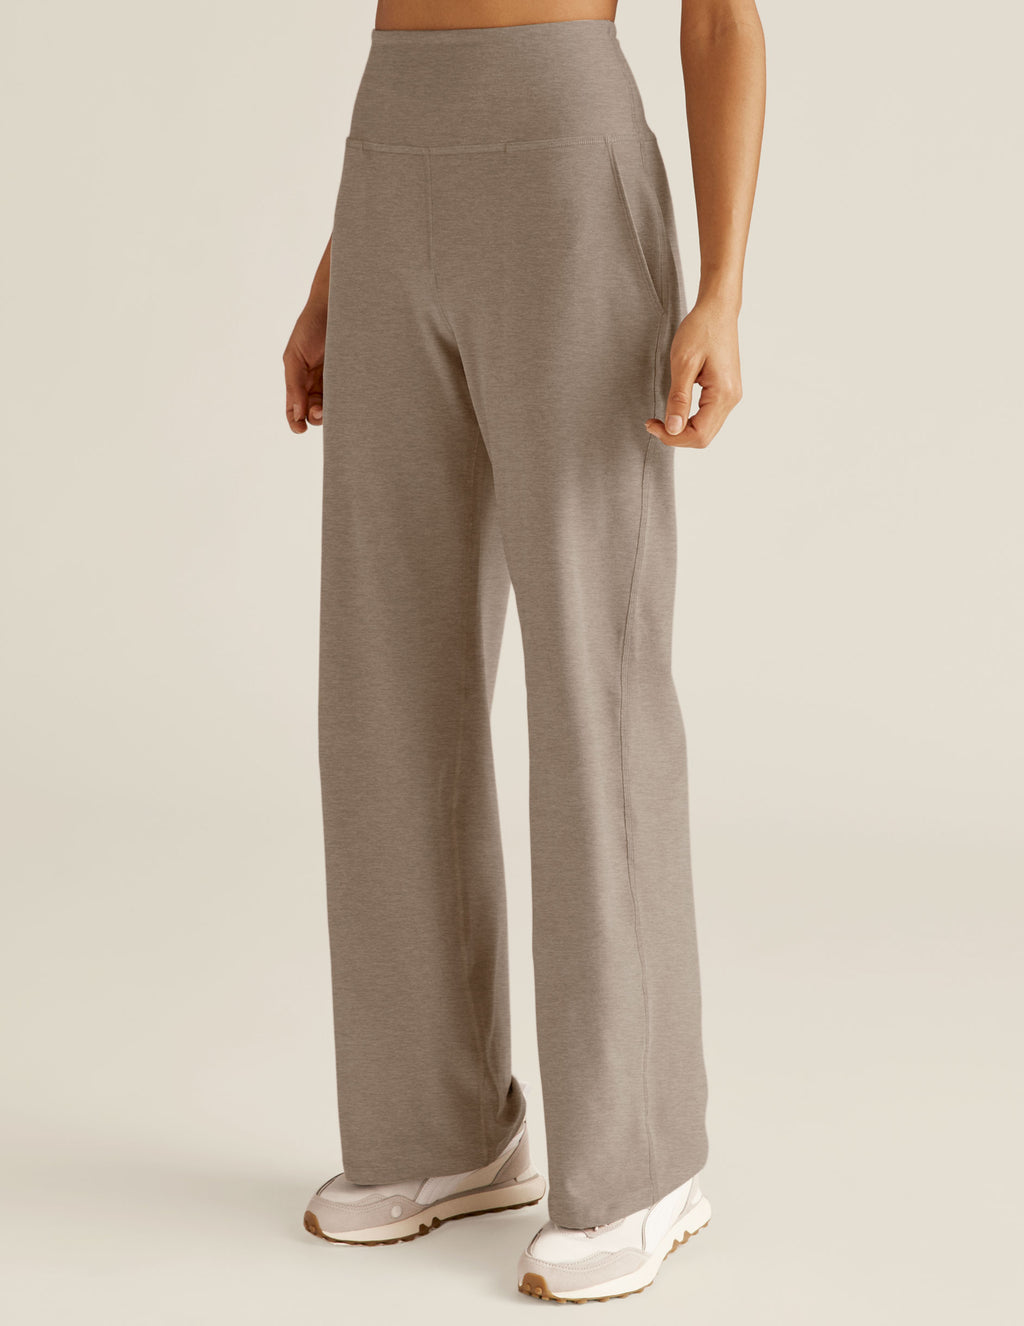 Spacedye Laid Back Wide Leg Pant Secondary Image